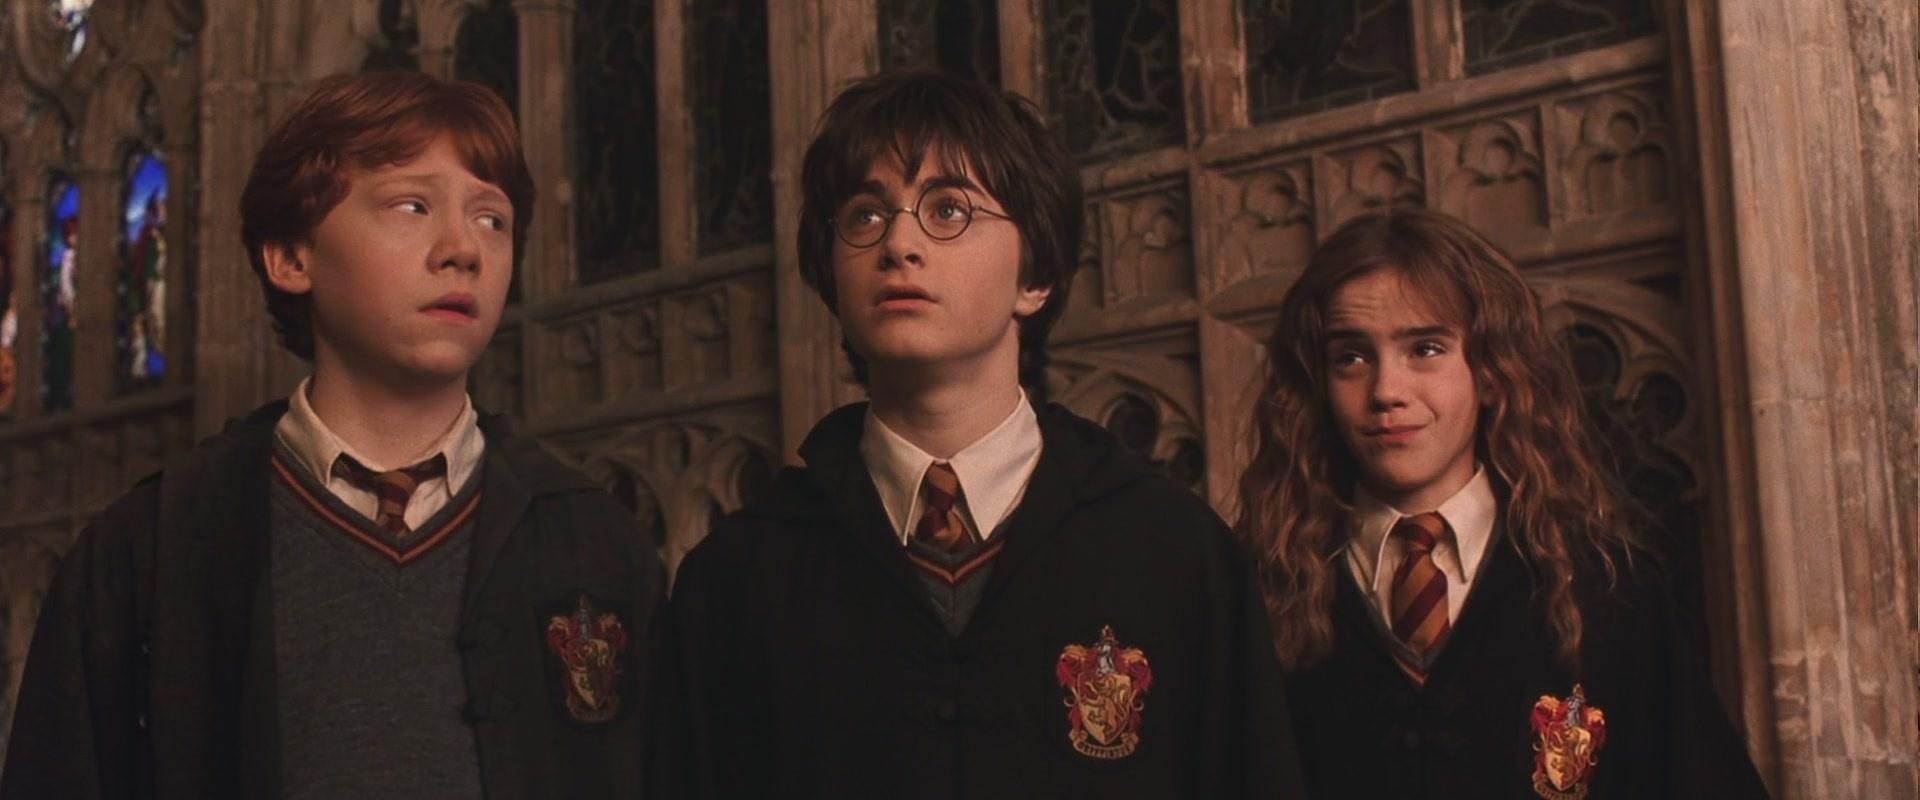 Watch Harry Potter Movies In Order! Here Are All The Harry ...